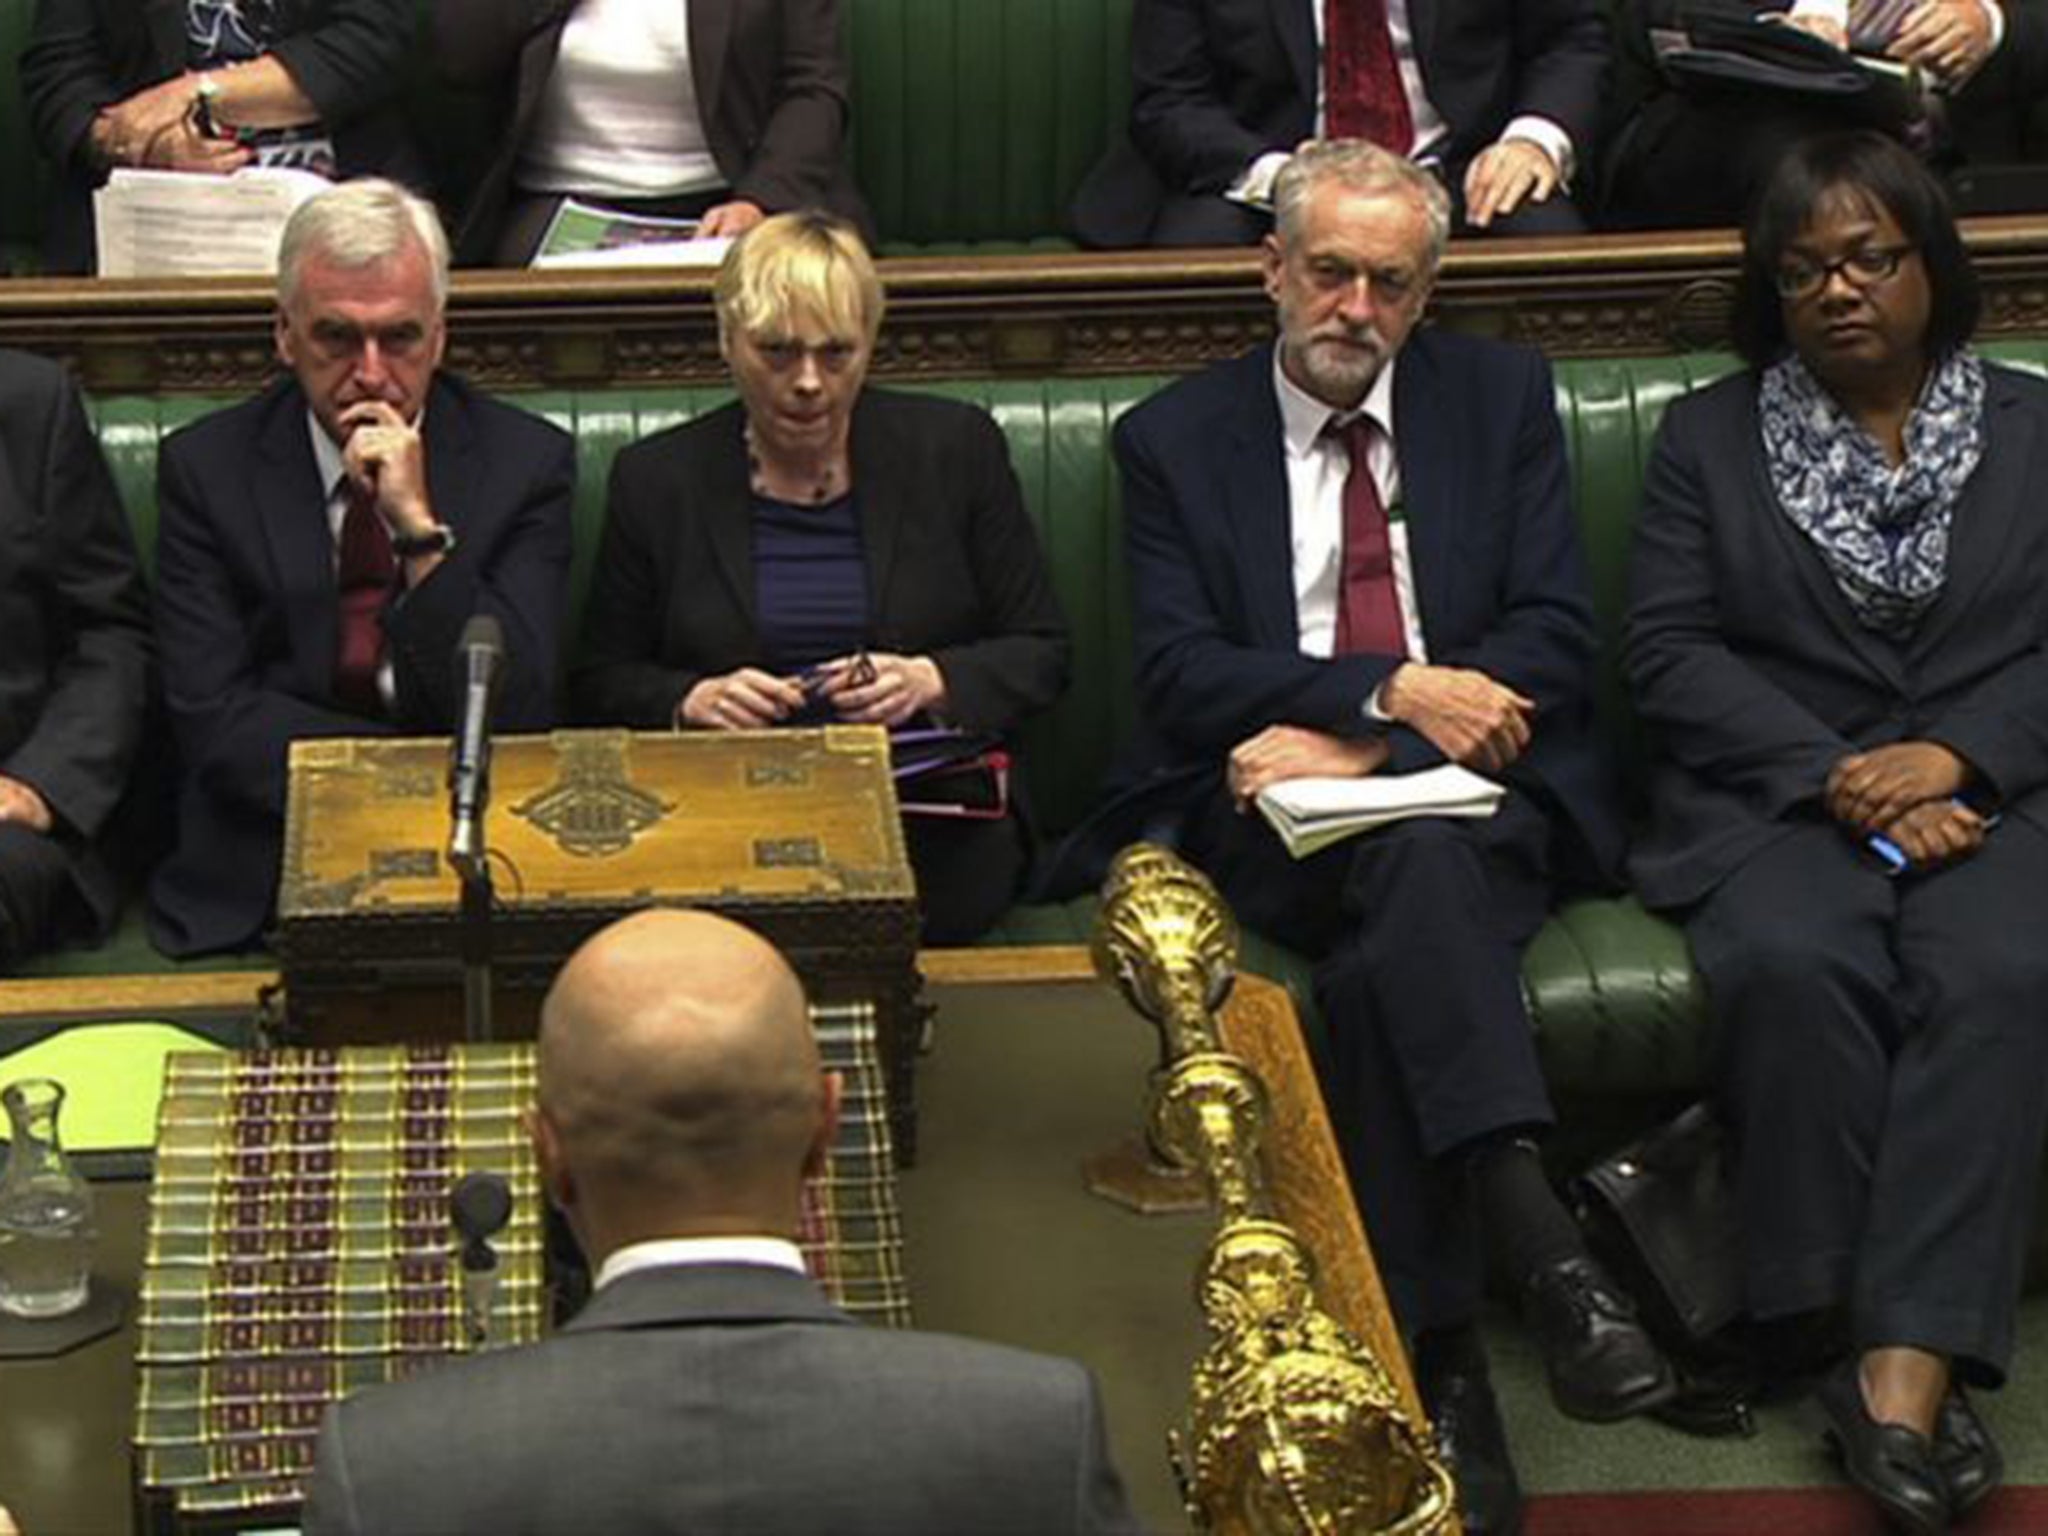 Jeremy Corbyn has come under attack for his selection of John McDonnell as shadow Chancellor, pictured left, and over the absence of women in the most senior Shadow Cabinet posts